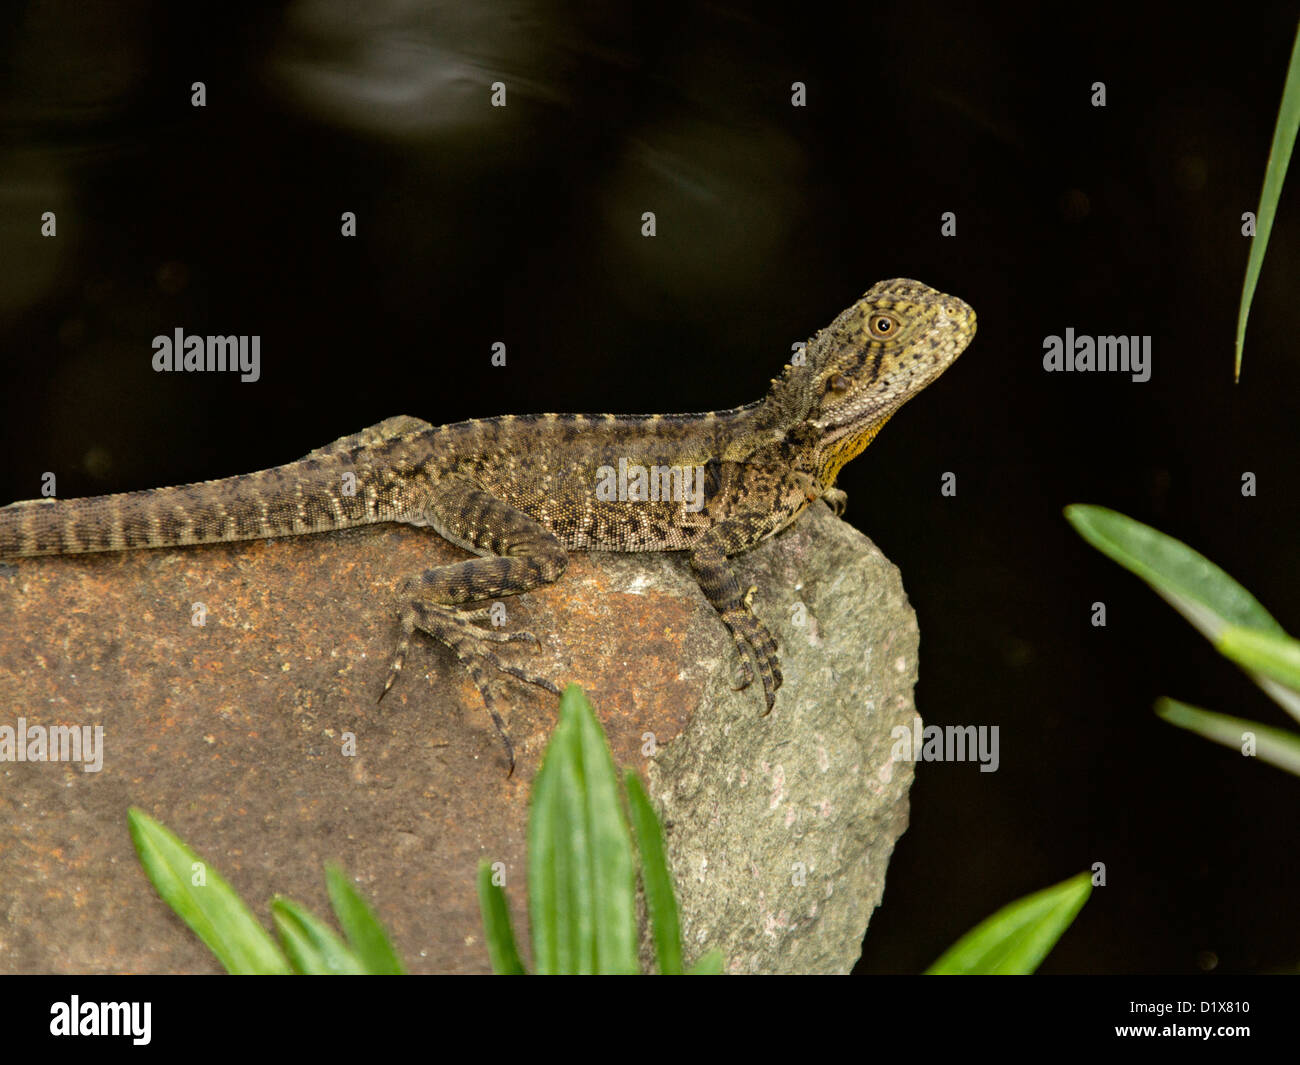 Young Australian eastern water dragon - a lizard - sunning itself on rock by a pond Stock Photo